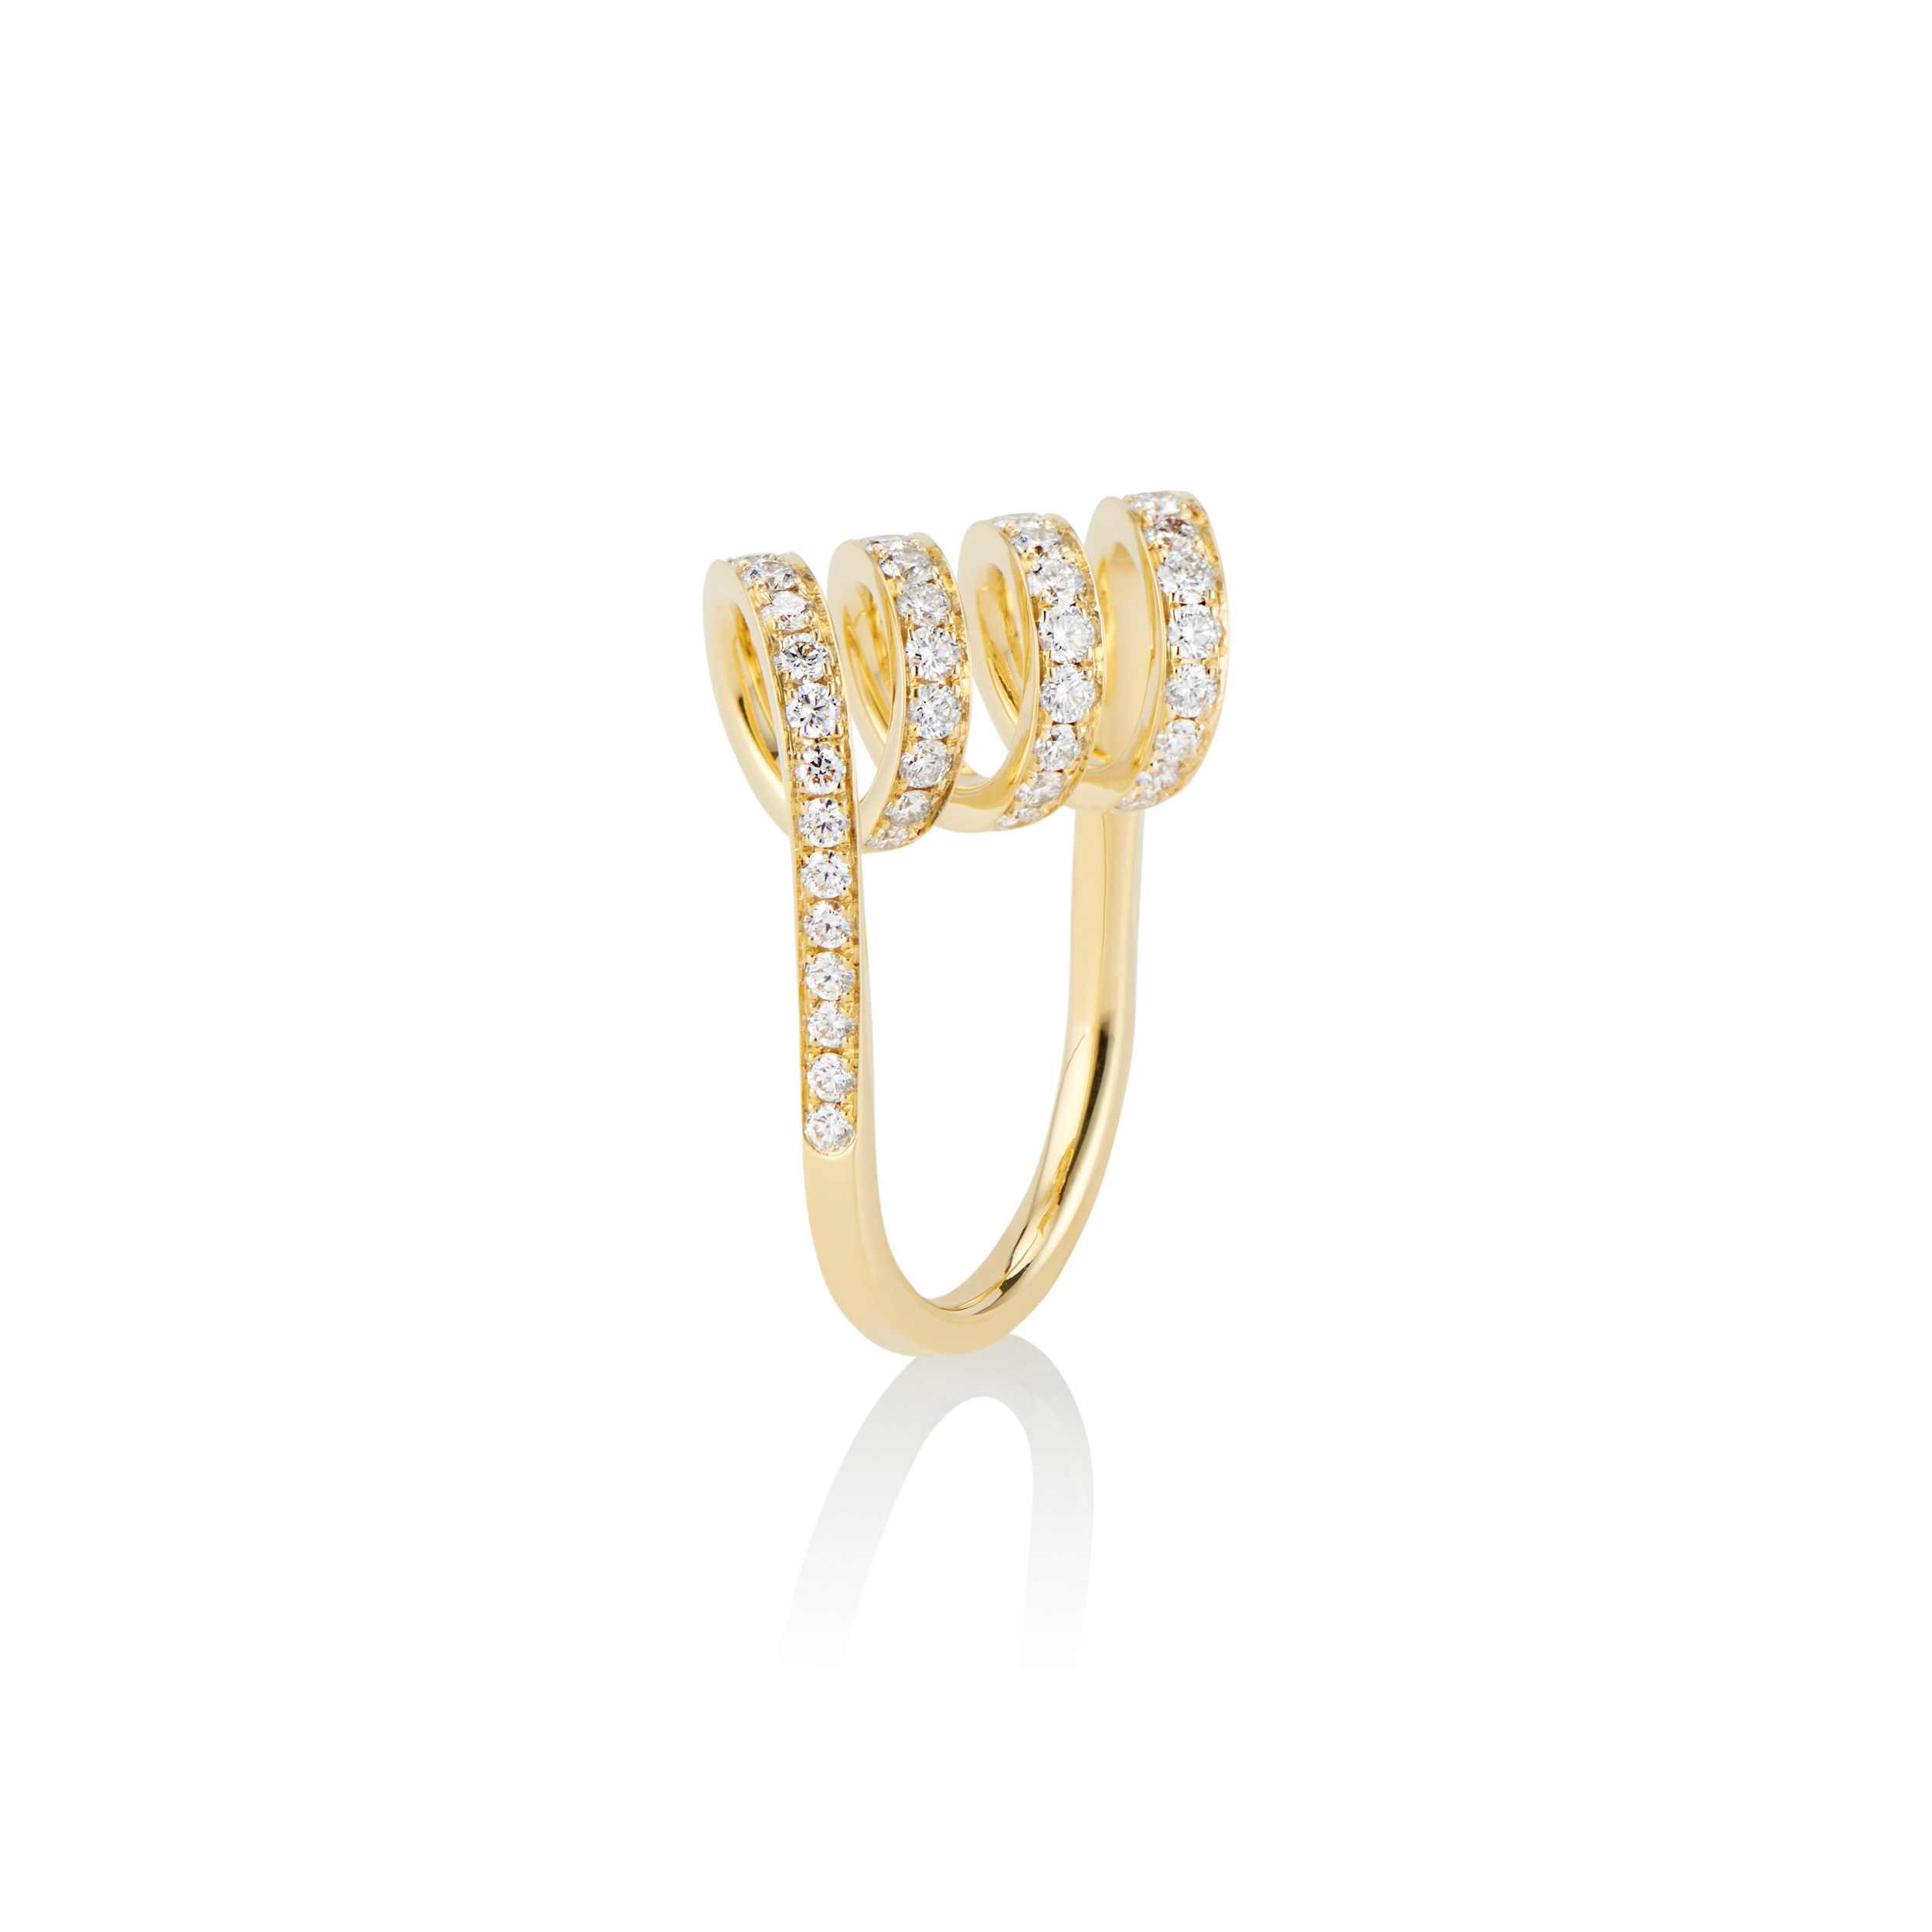 This is a photo of another angle of the Pave Curl Ring designed by Sardwell for Renisis. It features a unique spiral design in 18k yellow gold and pave‘ diamonds.